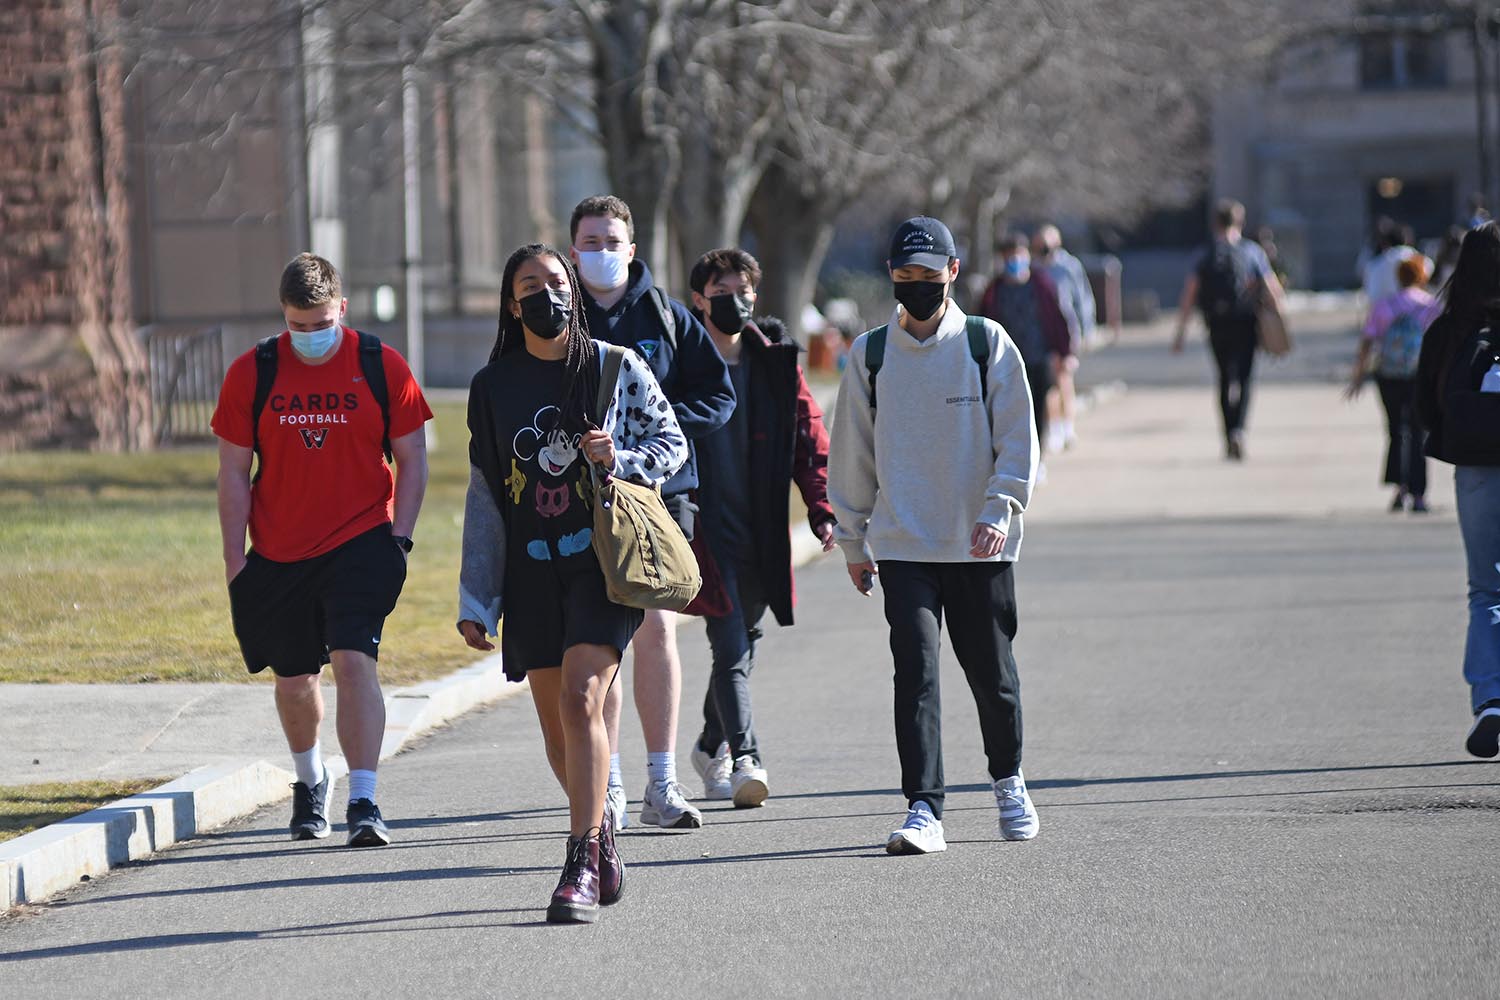 Students, who are in their fifth week of spring semester classes, continue to wear face coverings in all public places during the COVID-19 pandemic.